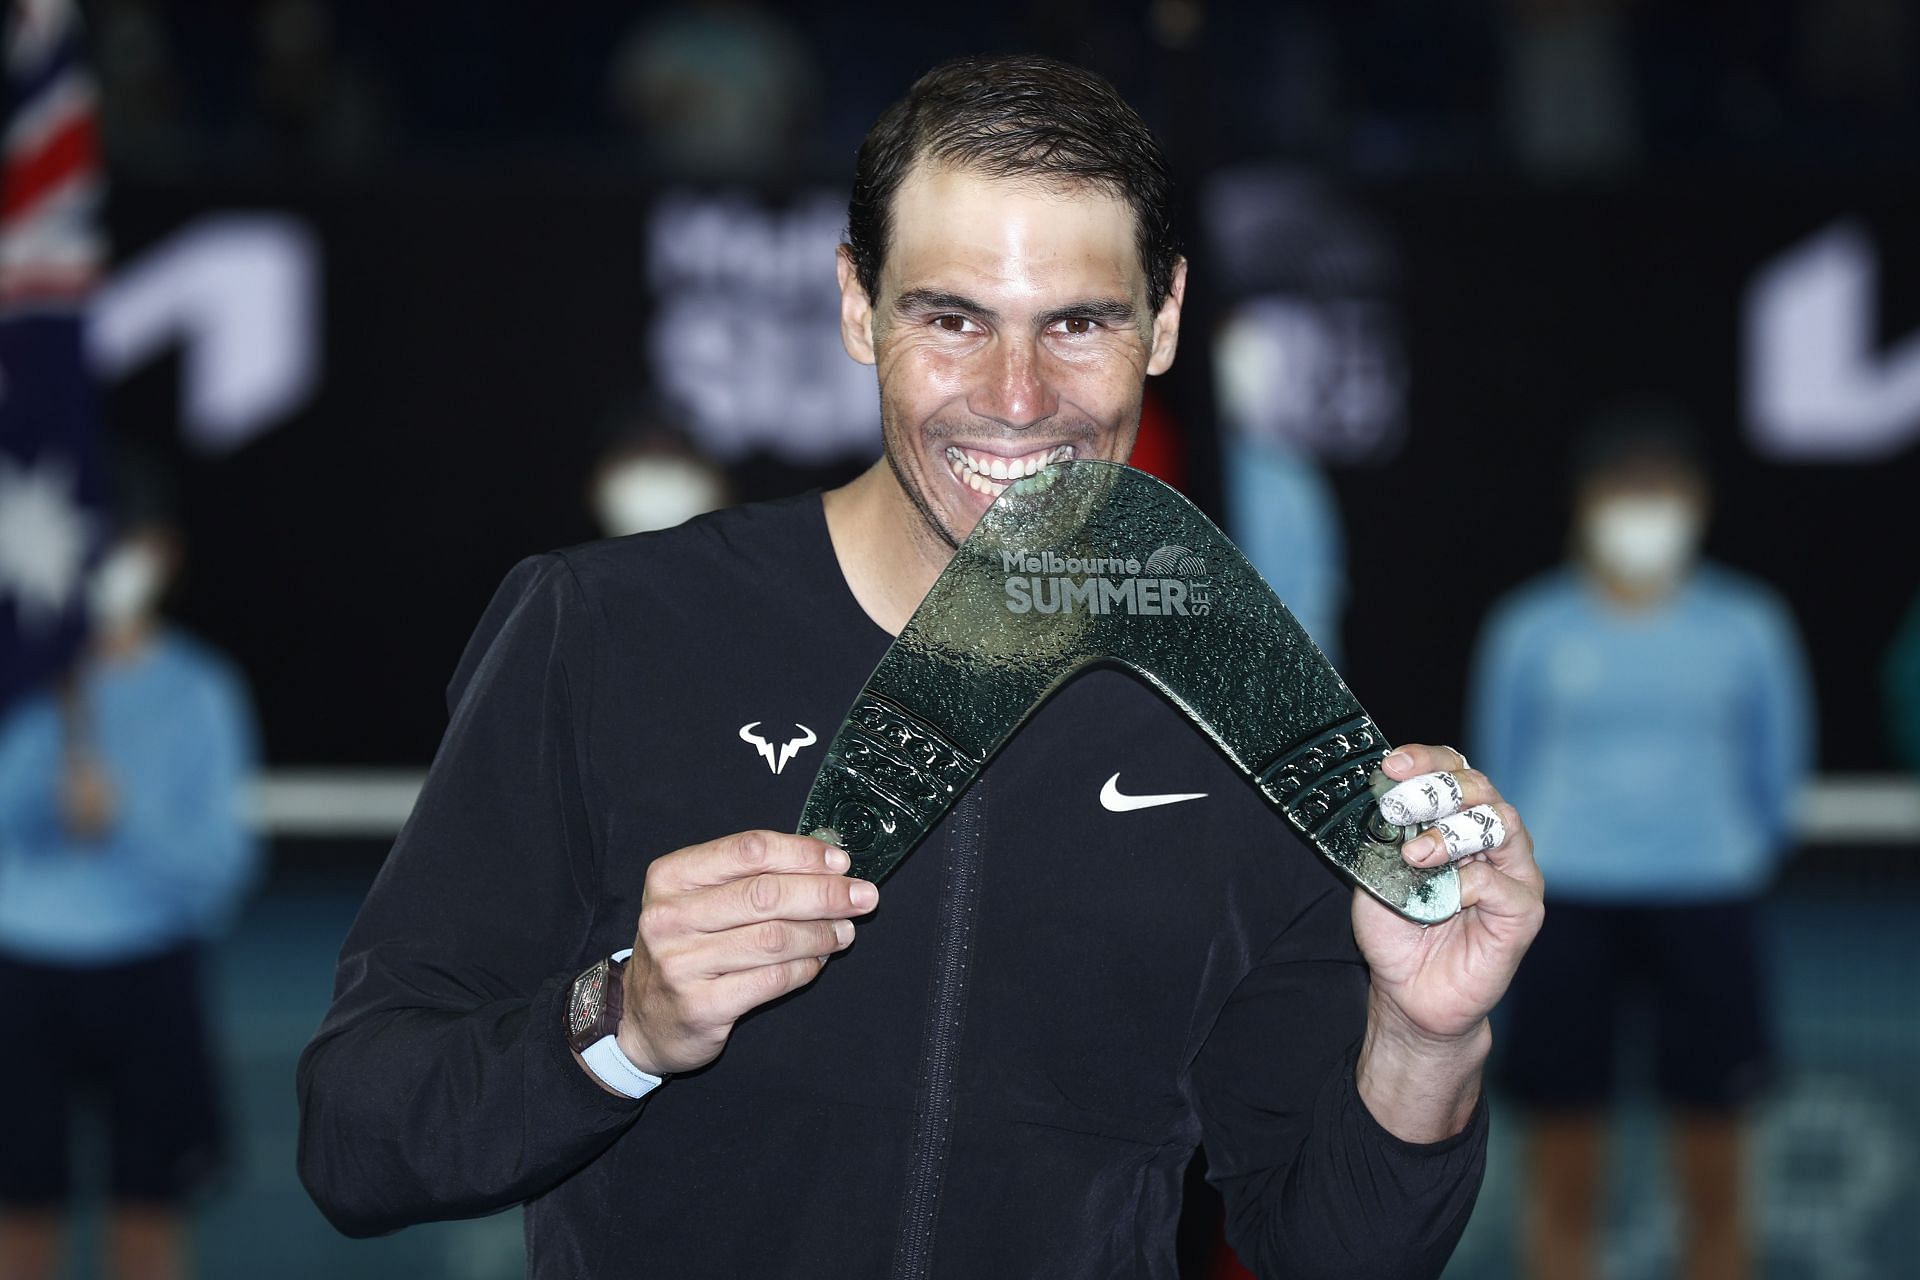 Rafael Nadal poses with the trophy at the Melbourne Summer Events at Melbourne Park